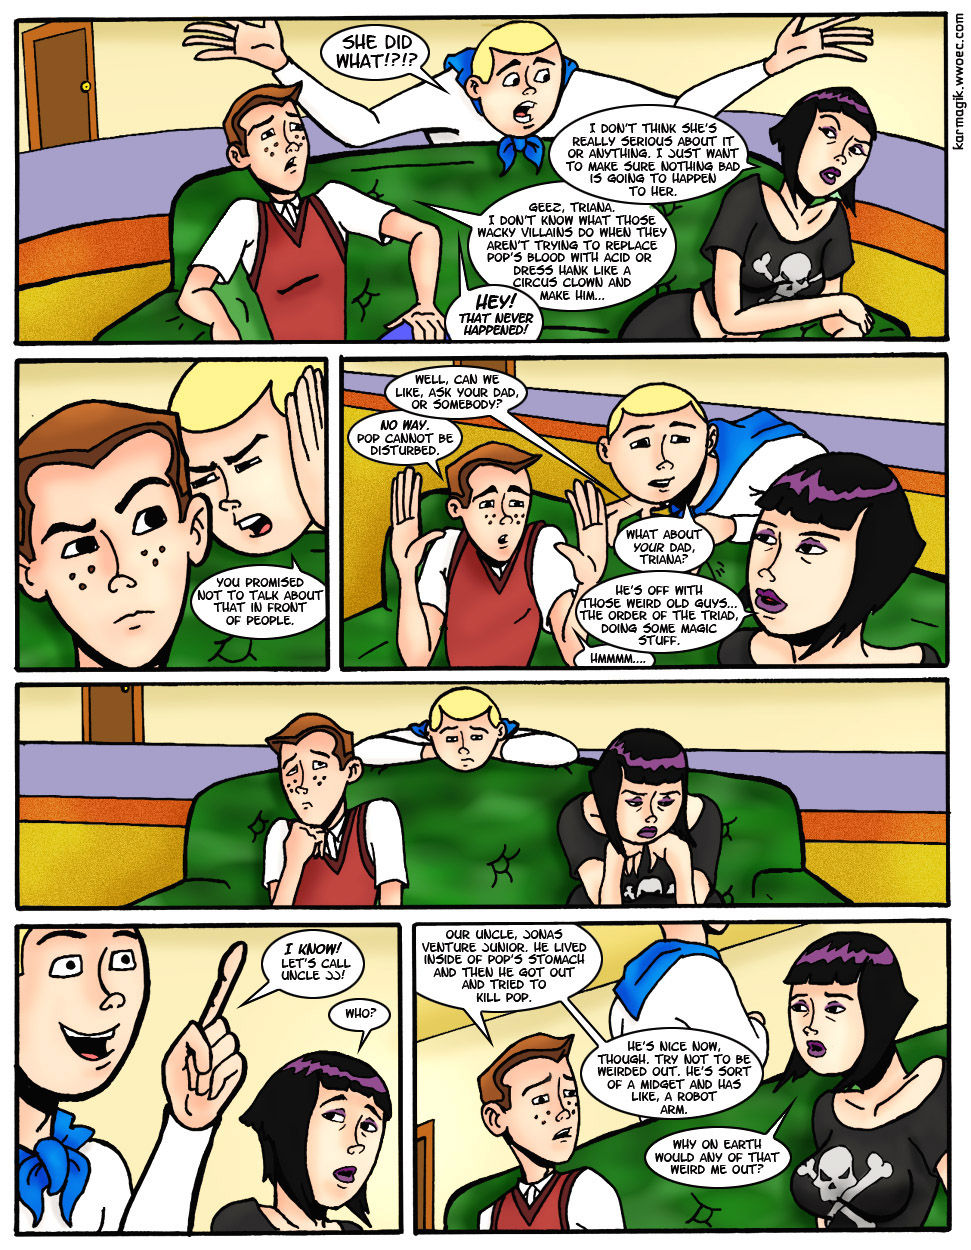 [Karmagik] Villainess Intentions (The Venture Bros) [Full Color] 